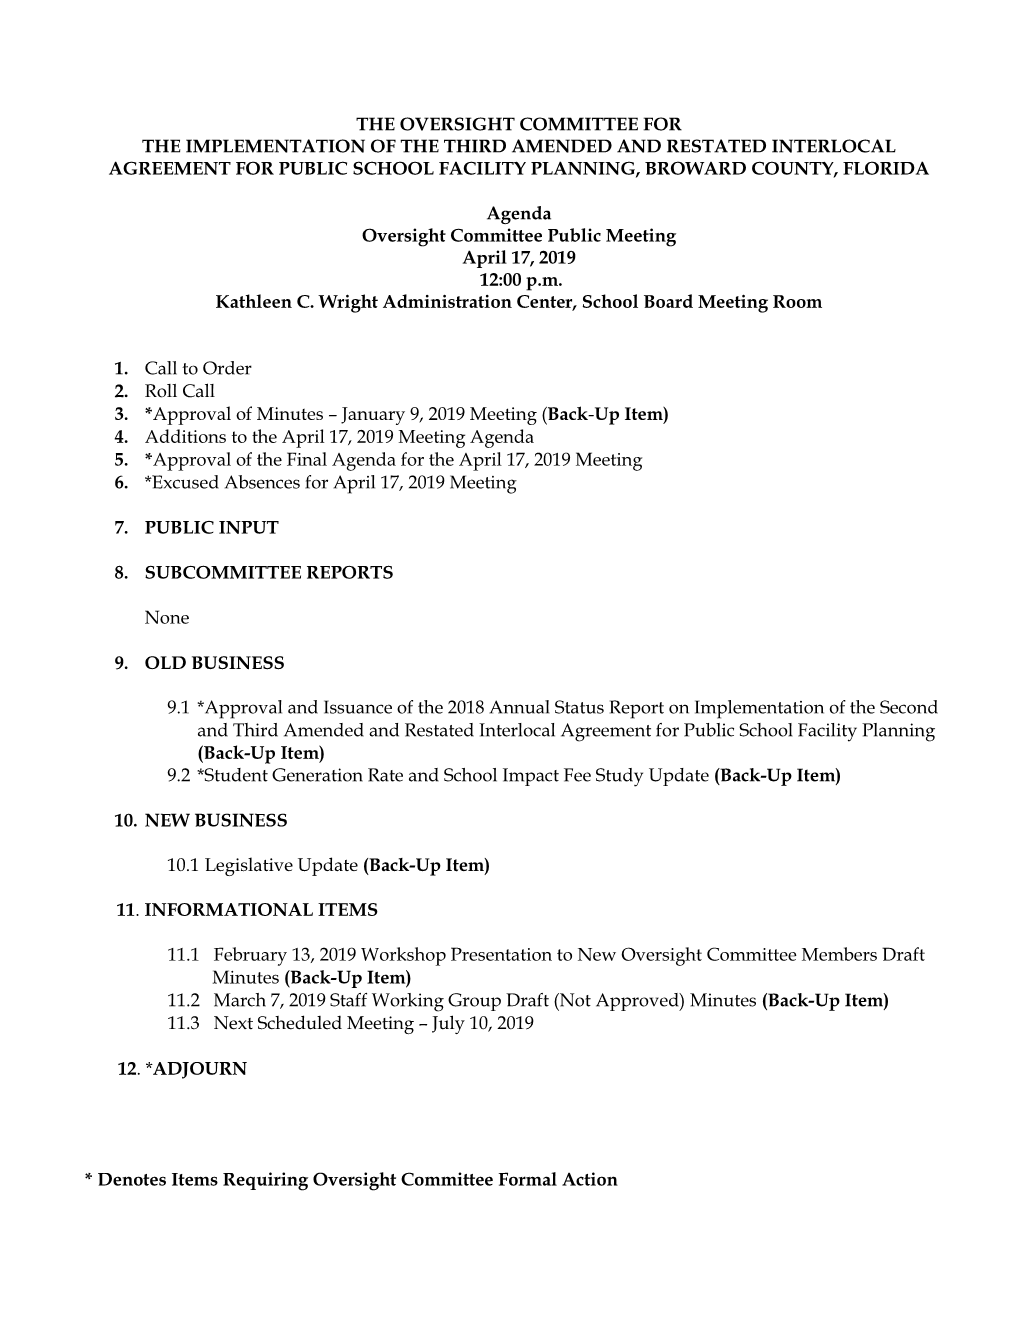 The Oversight Committee for the Implementation of the Third Amended and Restated Interlocal Agreement for Public School Facility Planning, Broward County, Florida